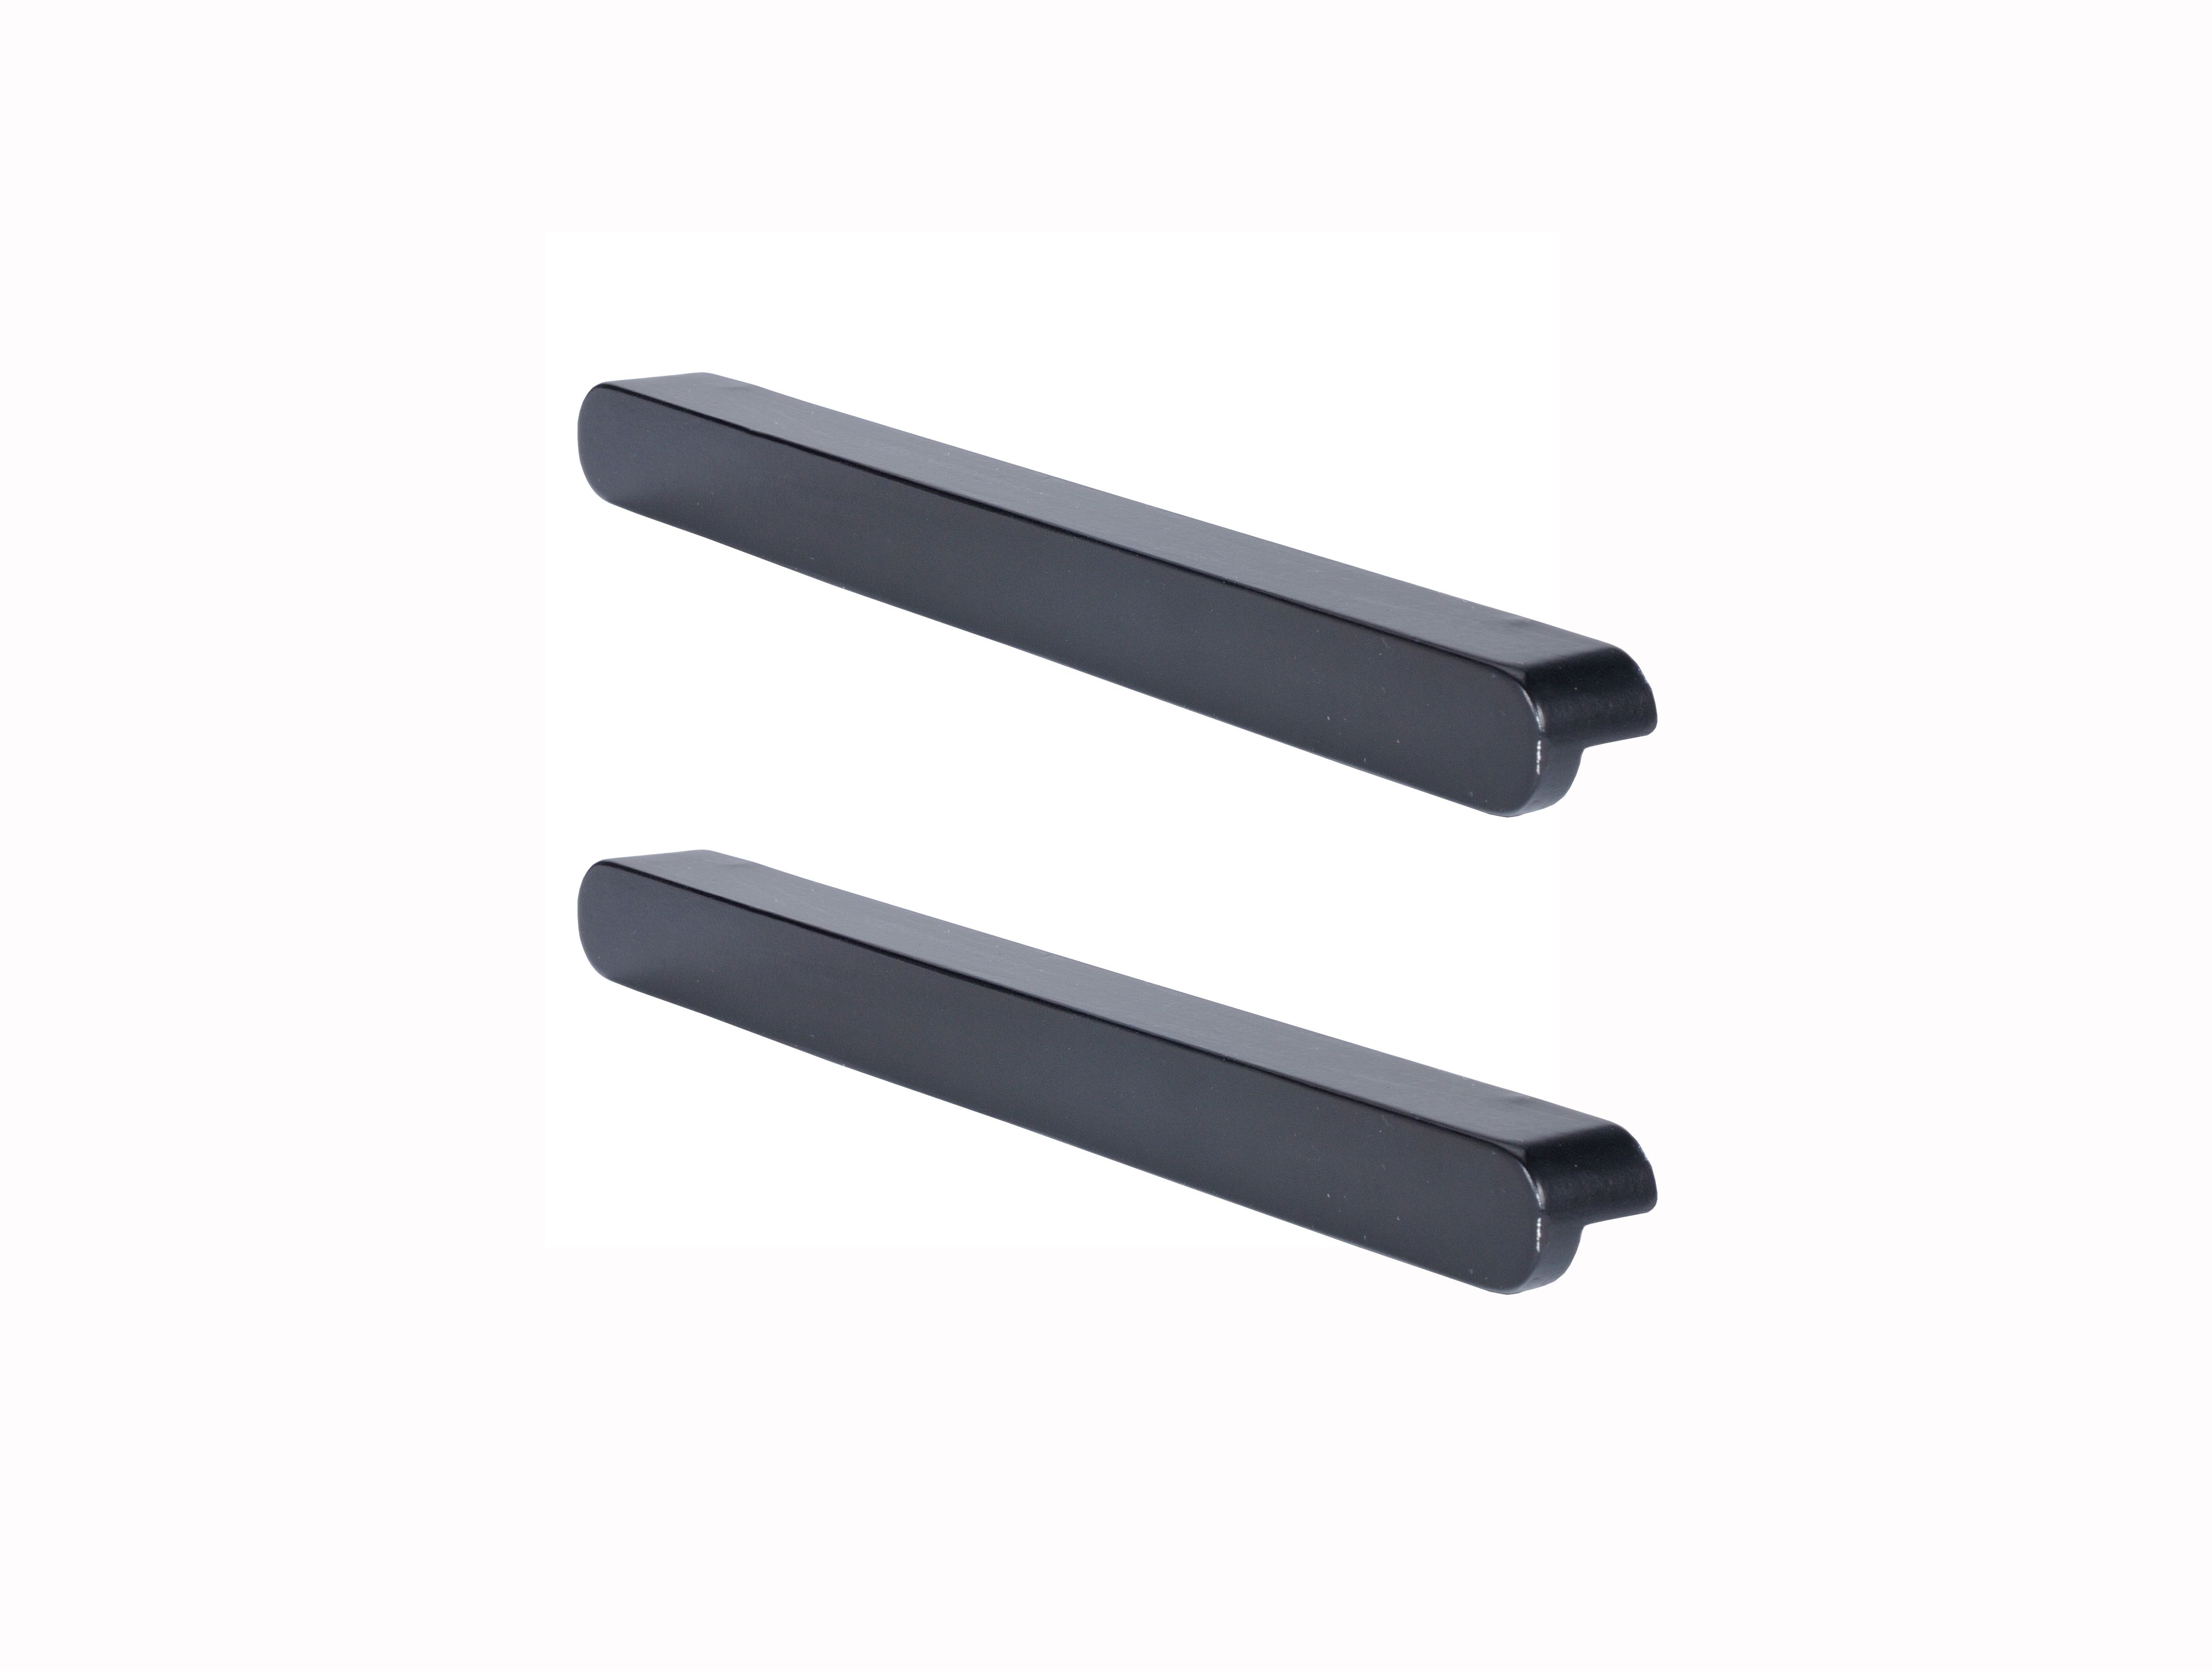 GoodHome Serrano Black Kitchen cabinets Handle (L)24cm, Pack of 2